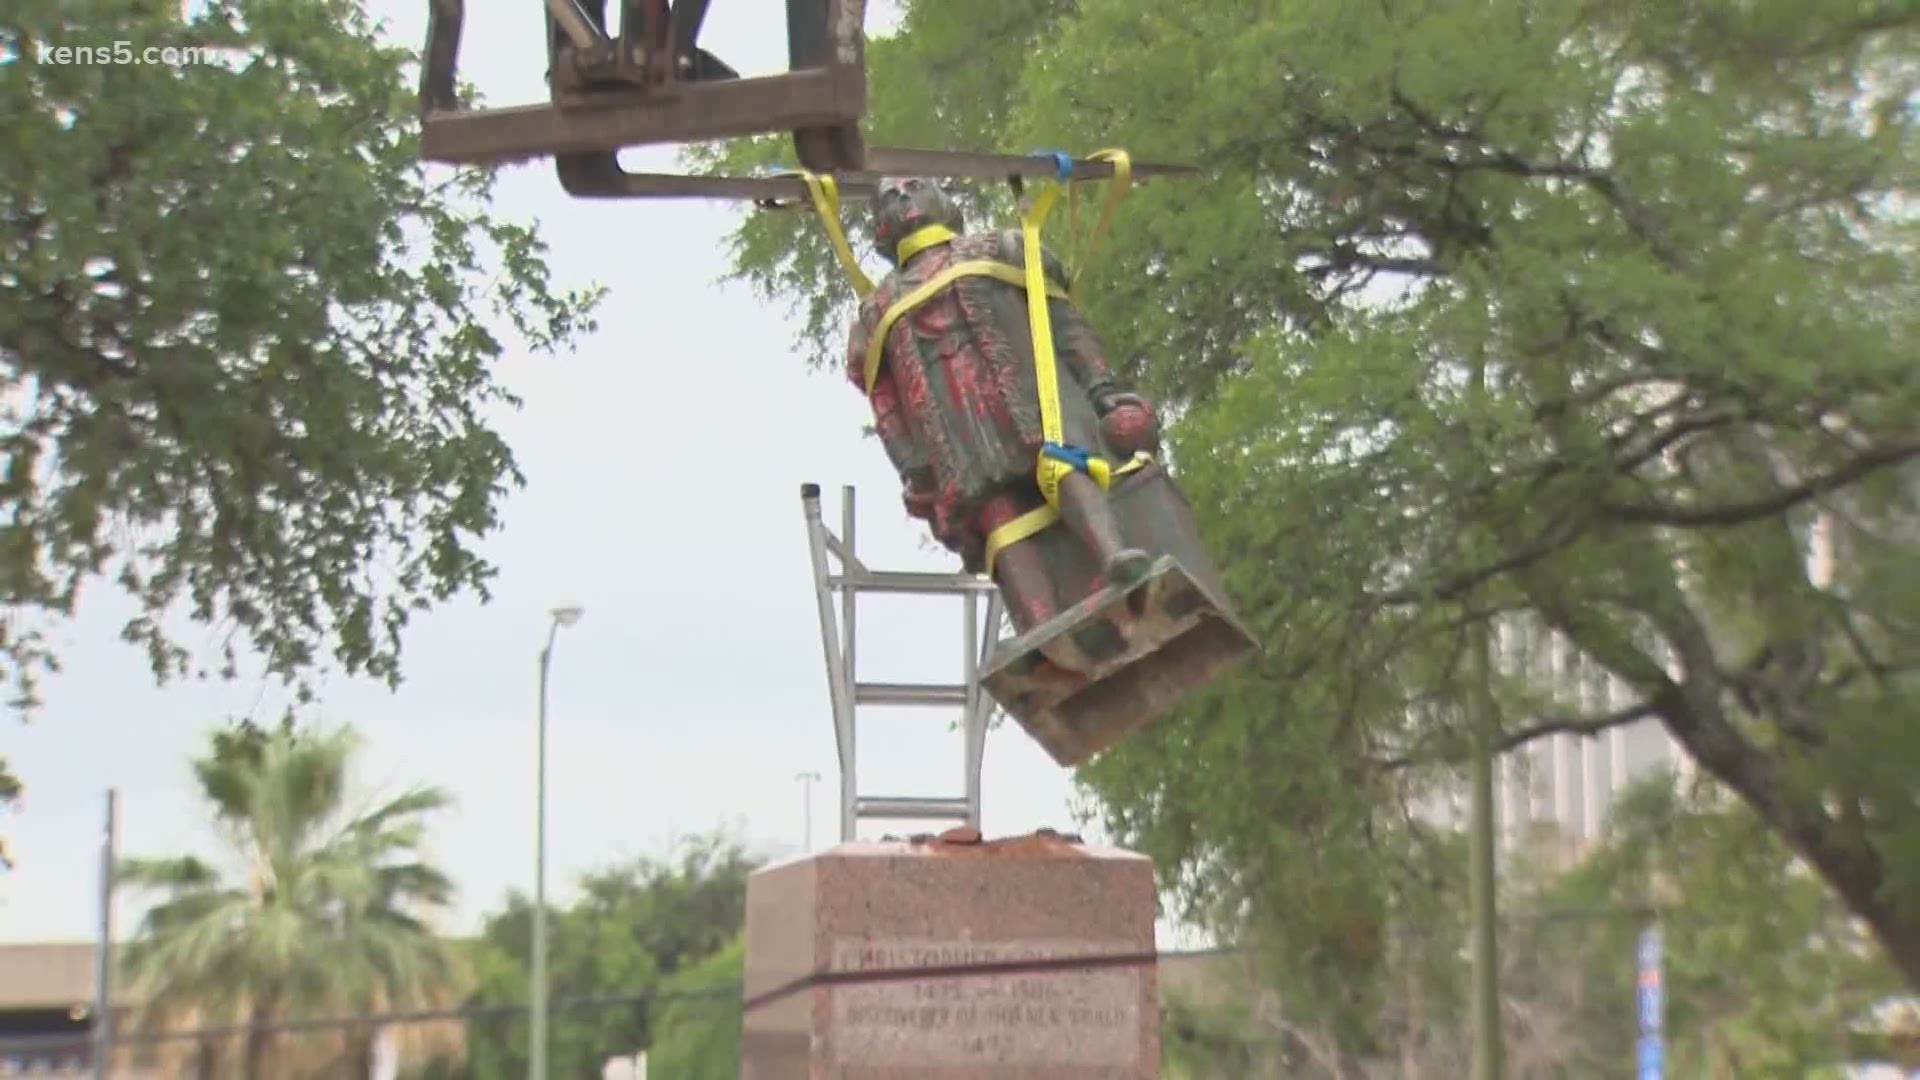 The statue has been removed for cleaning, and city council will soon vote on permanently removing it and returning it to the Christopher Columbus Italian Society.